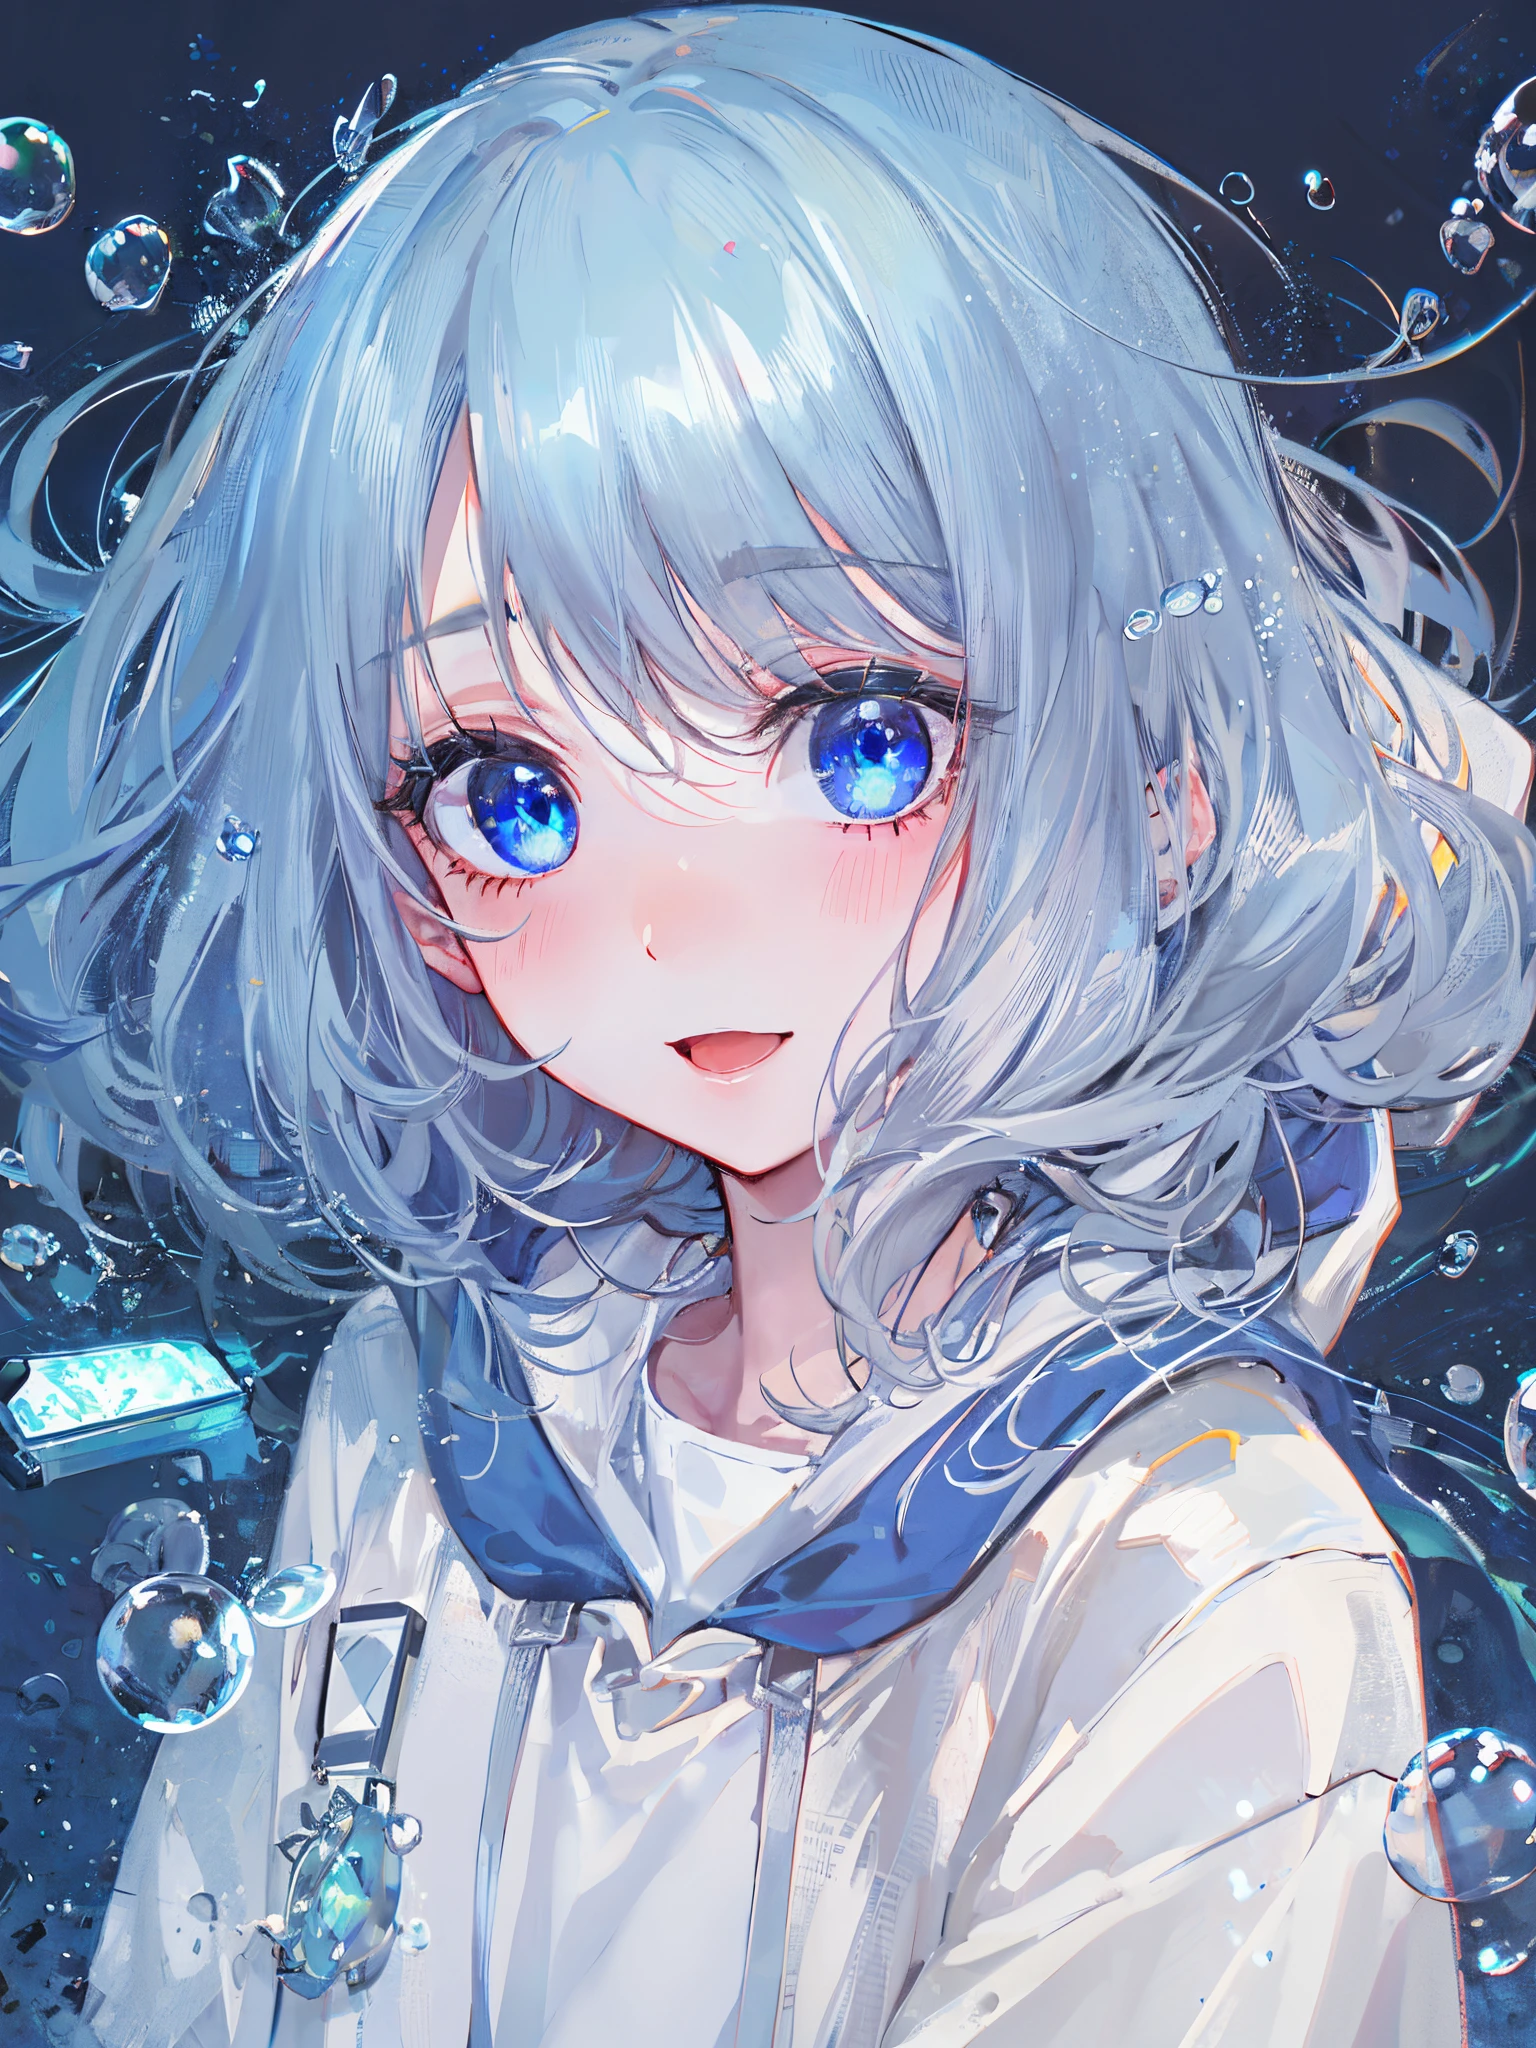 ((top-quality)), ((​masterpiece)), ((ultra-detailliert)), (Extremely delicate and beautiful), girl with, report, cold attitude,((White hoodie)),She is very(relax)with  the(Settled down)Looks,depth of fields,Evil smile,Bubble, under the water, Air bubble,Underwater world bright light blue eyes,inner color with bright gray hair and light blue tips,,,,,,,,,,,,,,,,,,,,,,,Cold background,Bob Hair - Linear Art, shortpants、knee high socks、White uniform like 、Light blue ribbon ties、Clothes are sheer、The hand in my right pocket is like a sapphire,Fronllesse Blue, A small blue light was floating、fantastic eyes、selfy,Self-shot、Bangs fall on the eyes, give a sexy impression.